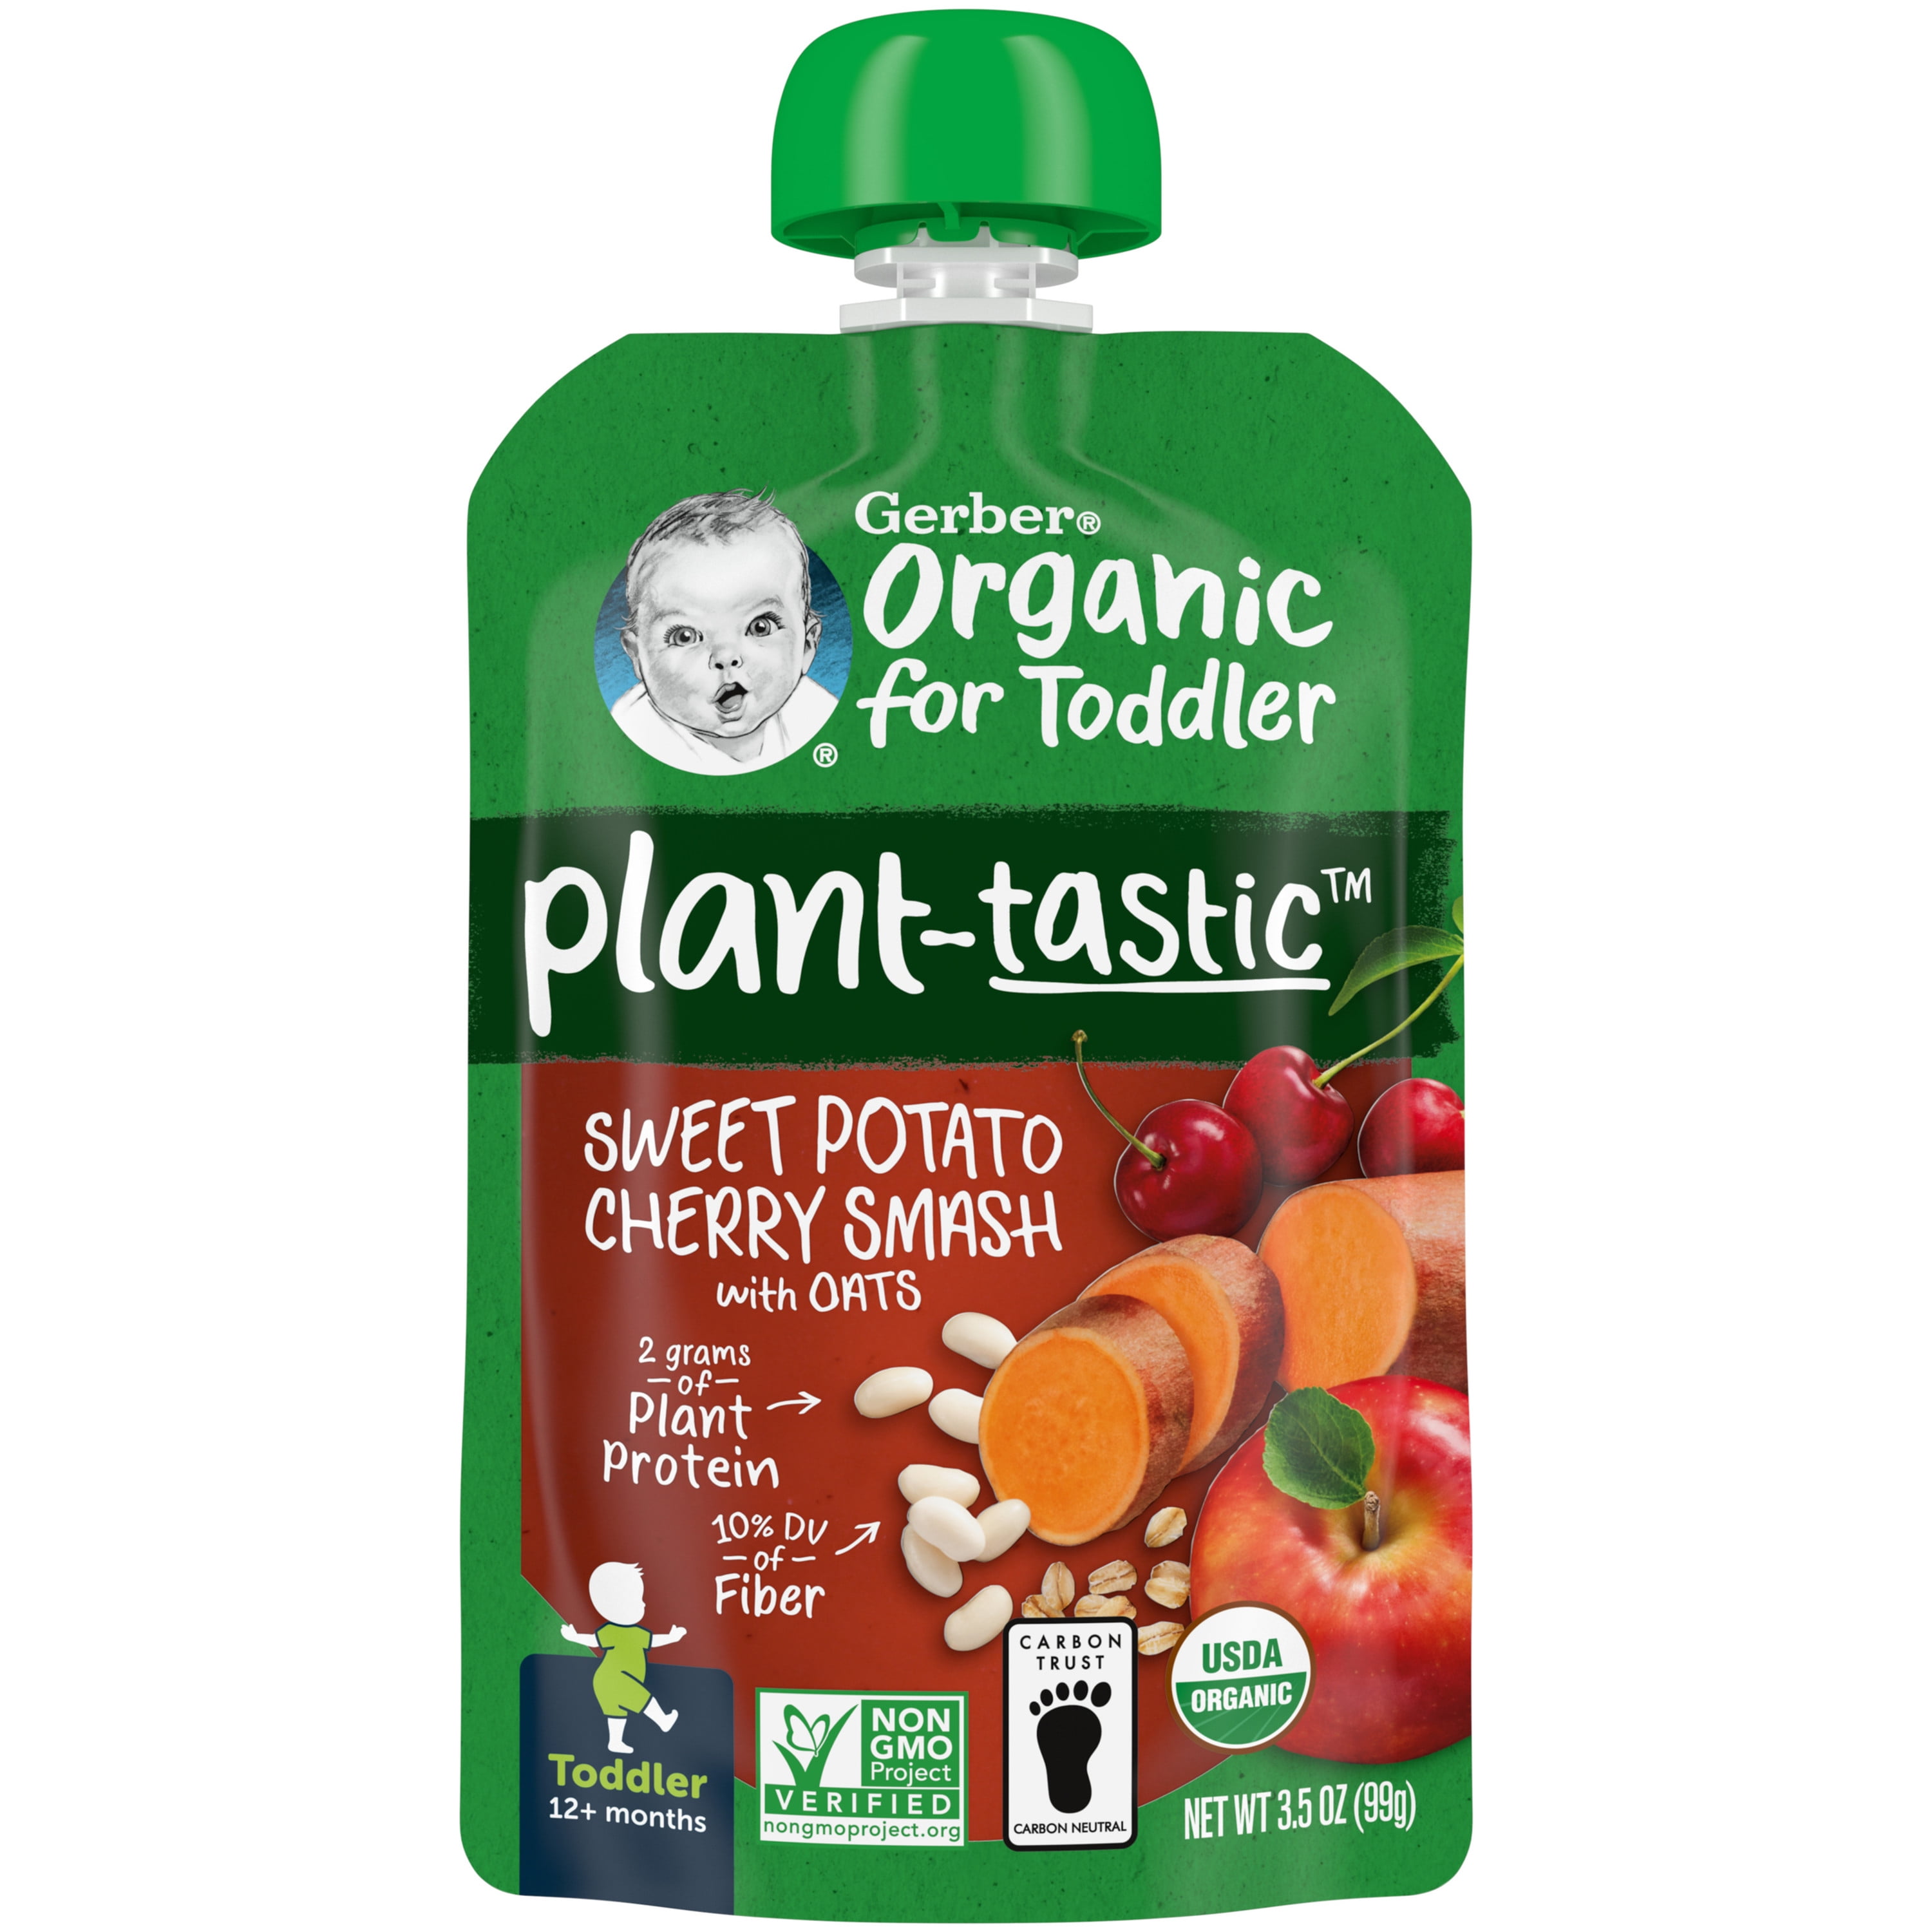 Gerber Organic for Toddler Plant-tastic Toddler Food Sweet Potato Cherry Smoothie, 3.5 oz, Pouch